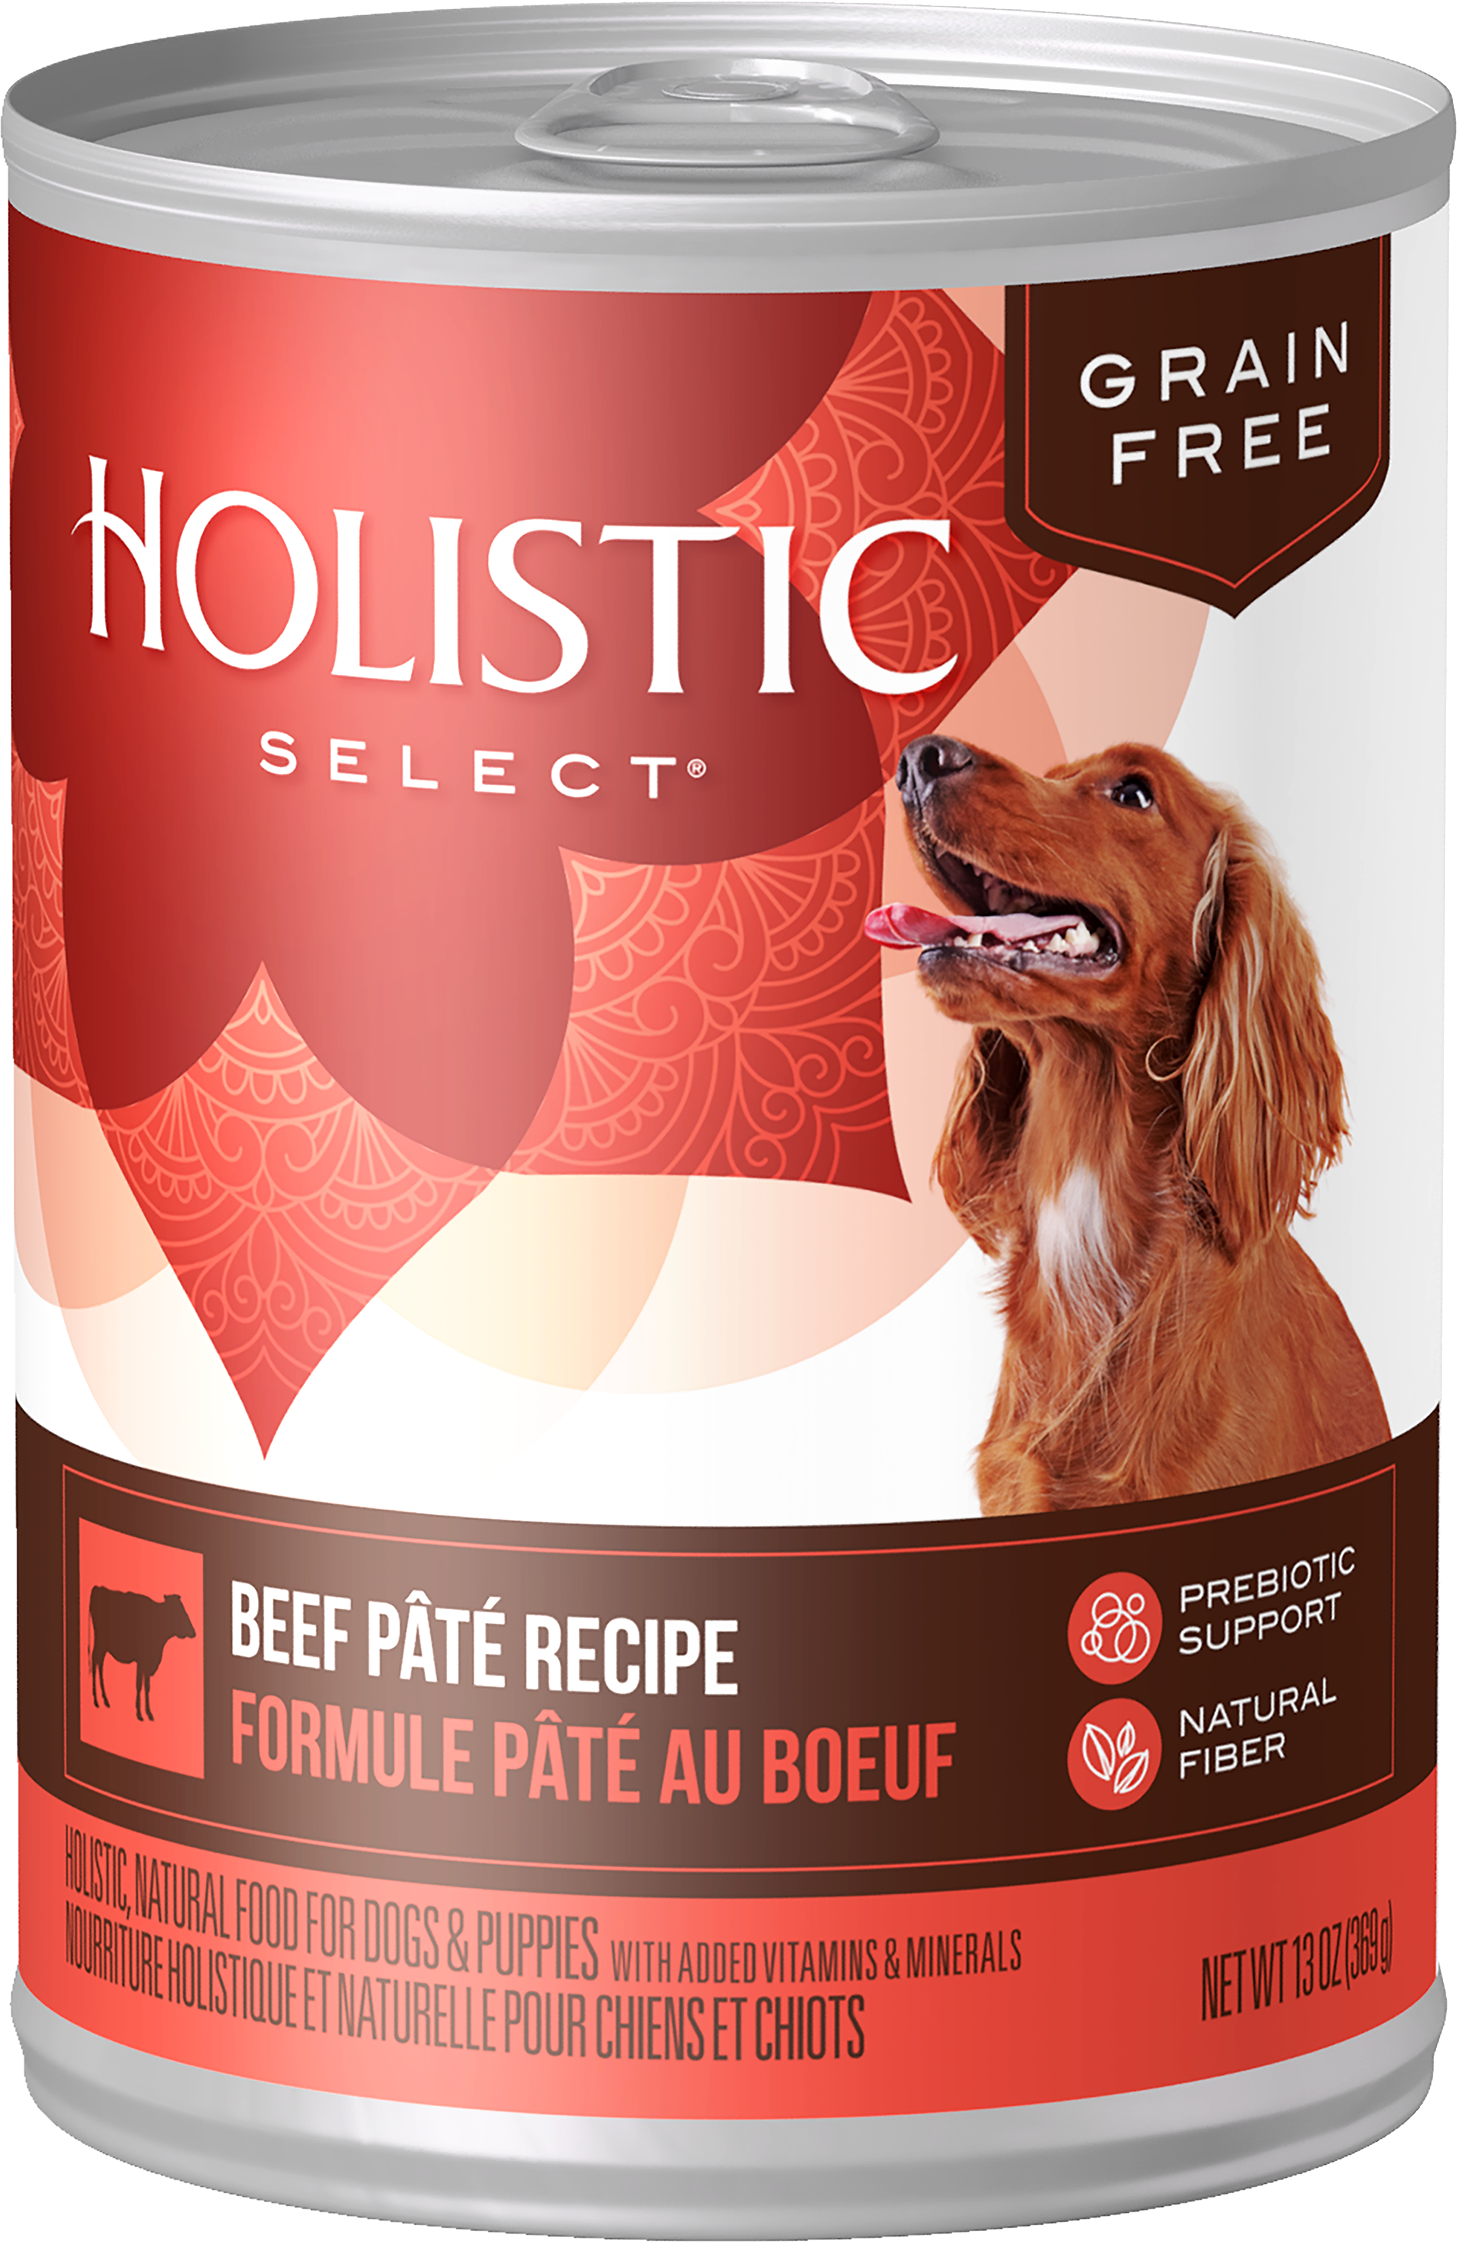 Grain Free Beef Pâté Recipe product packaging image 1